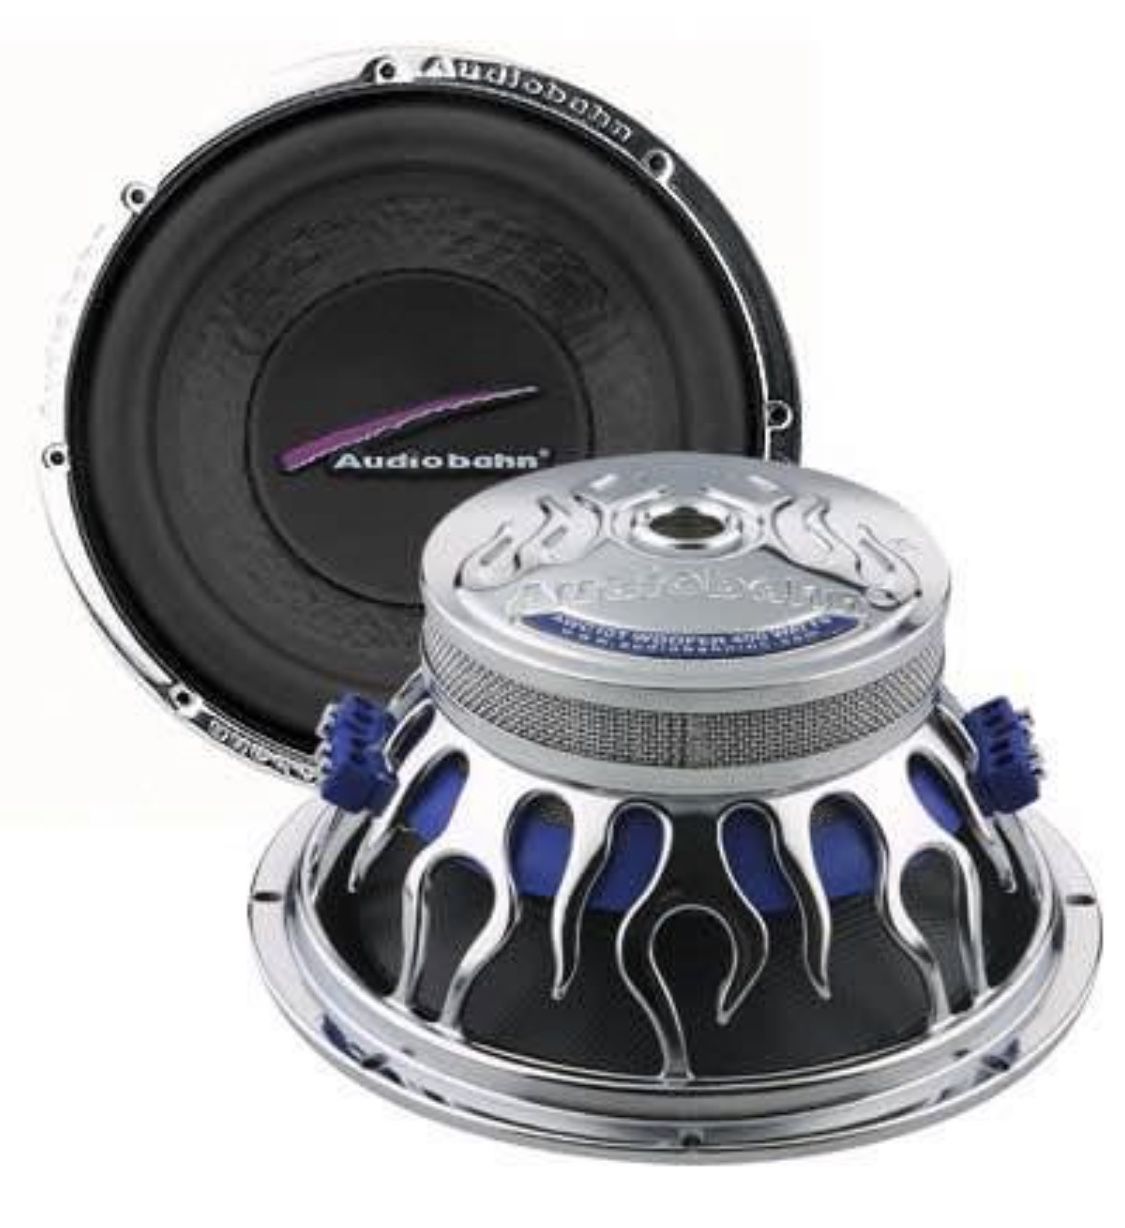 2 Dual Audiobahn AW1251T 12” Subwoofers